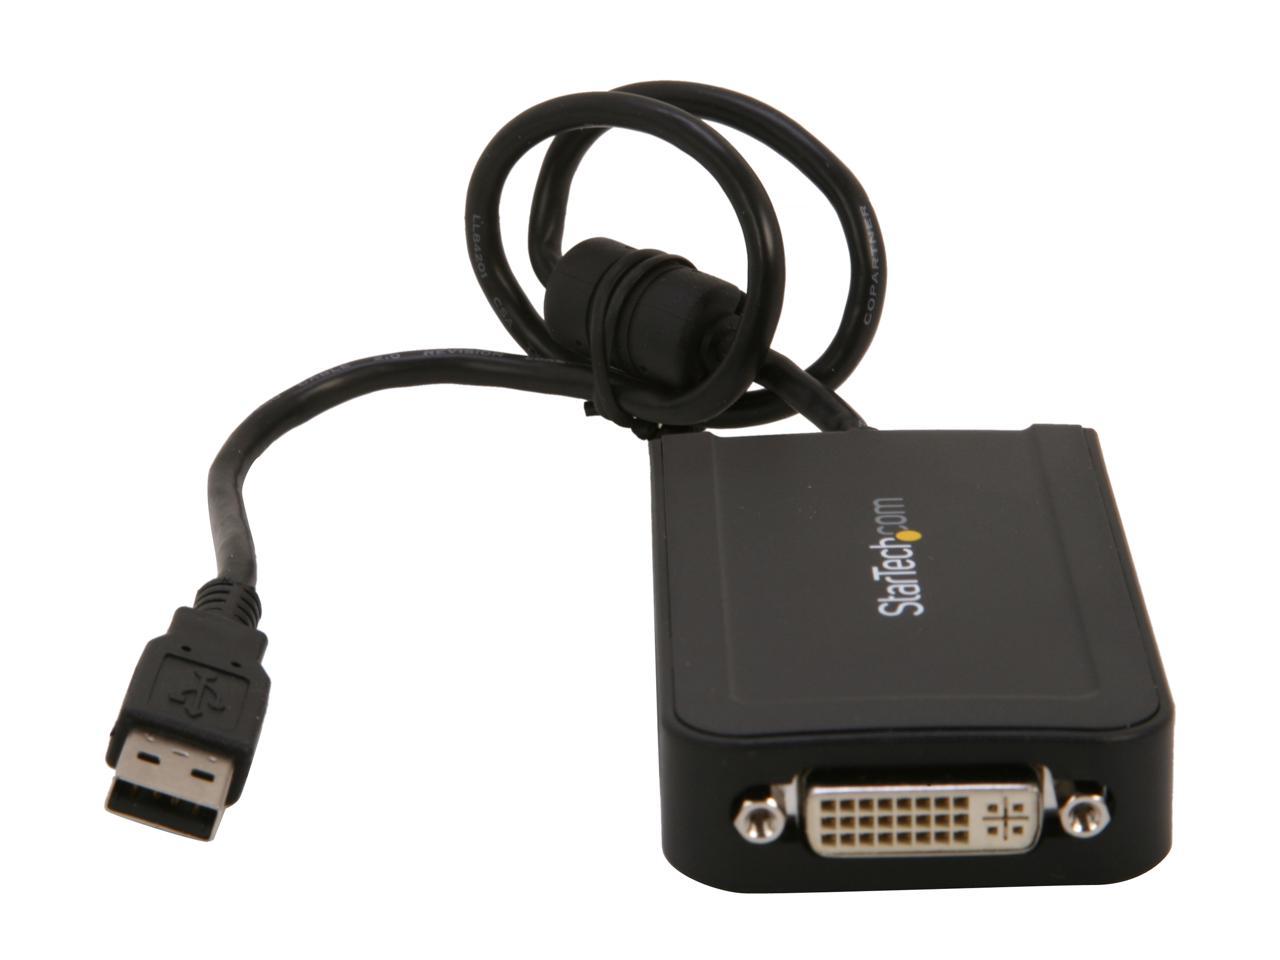 high rated usb adapter vga video card external for a mac